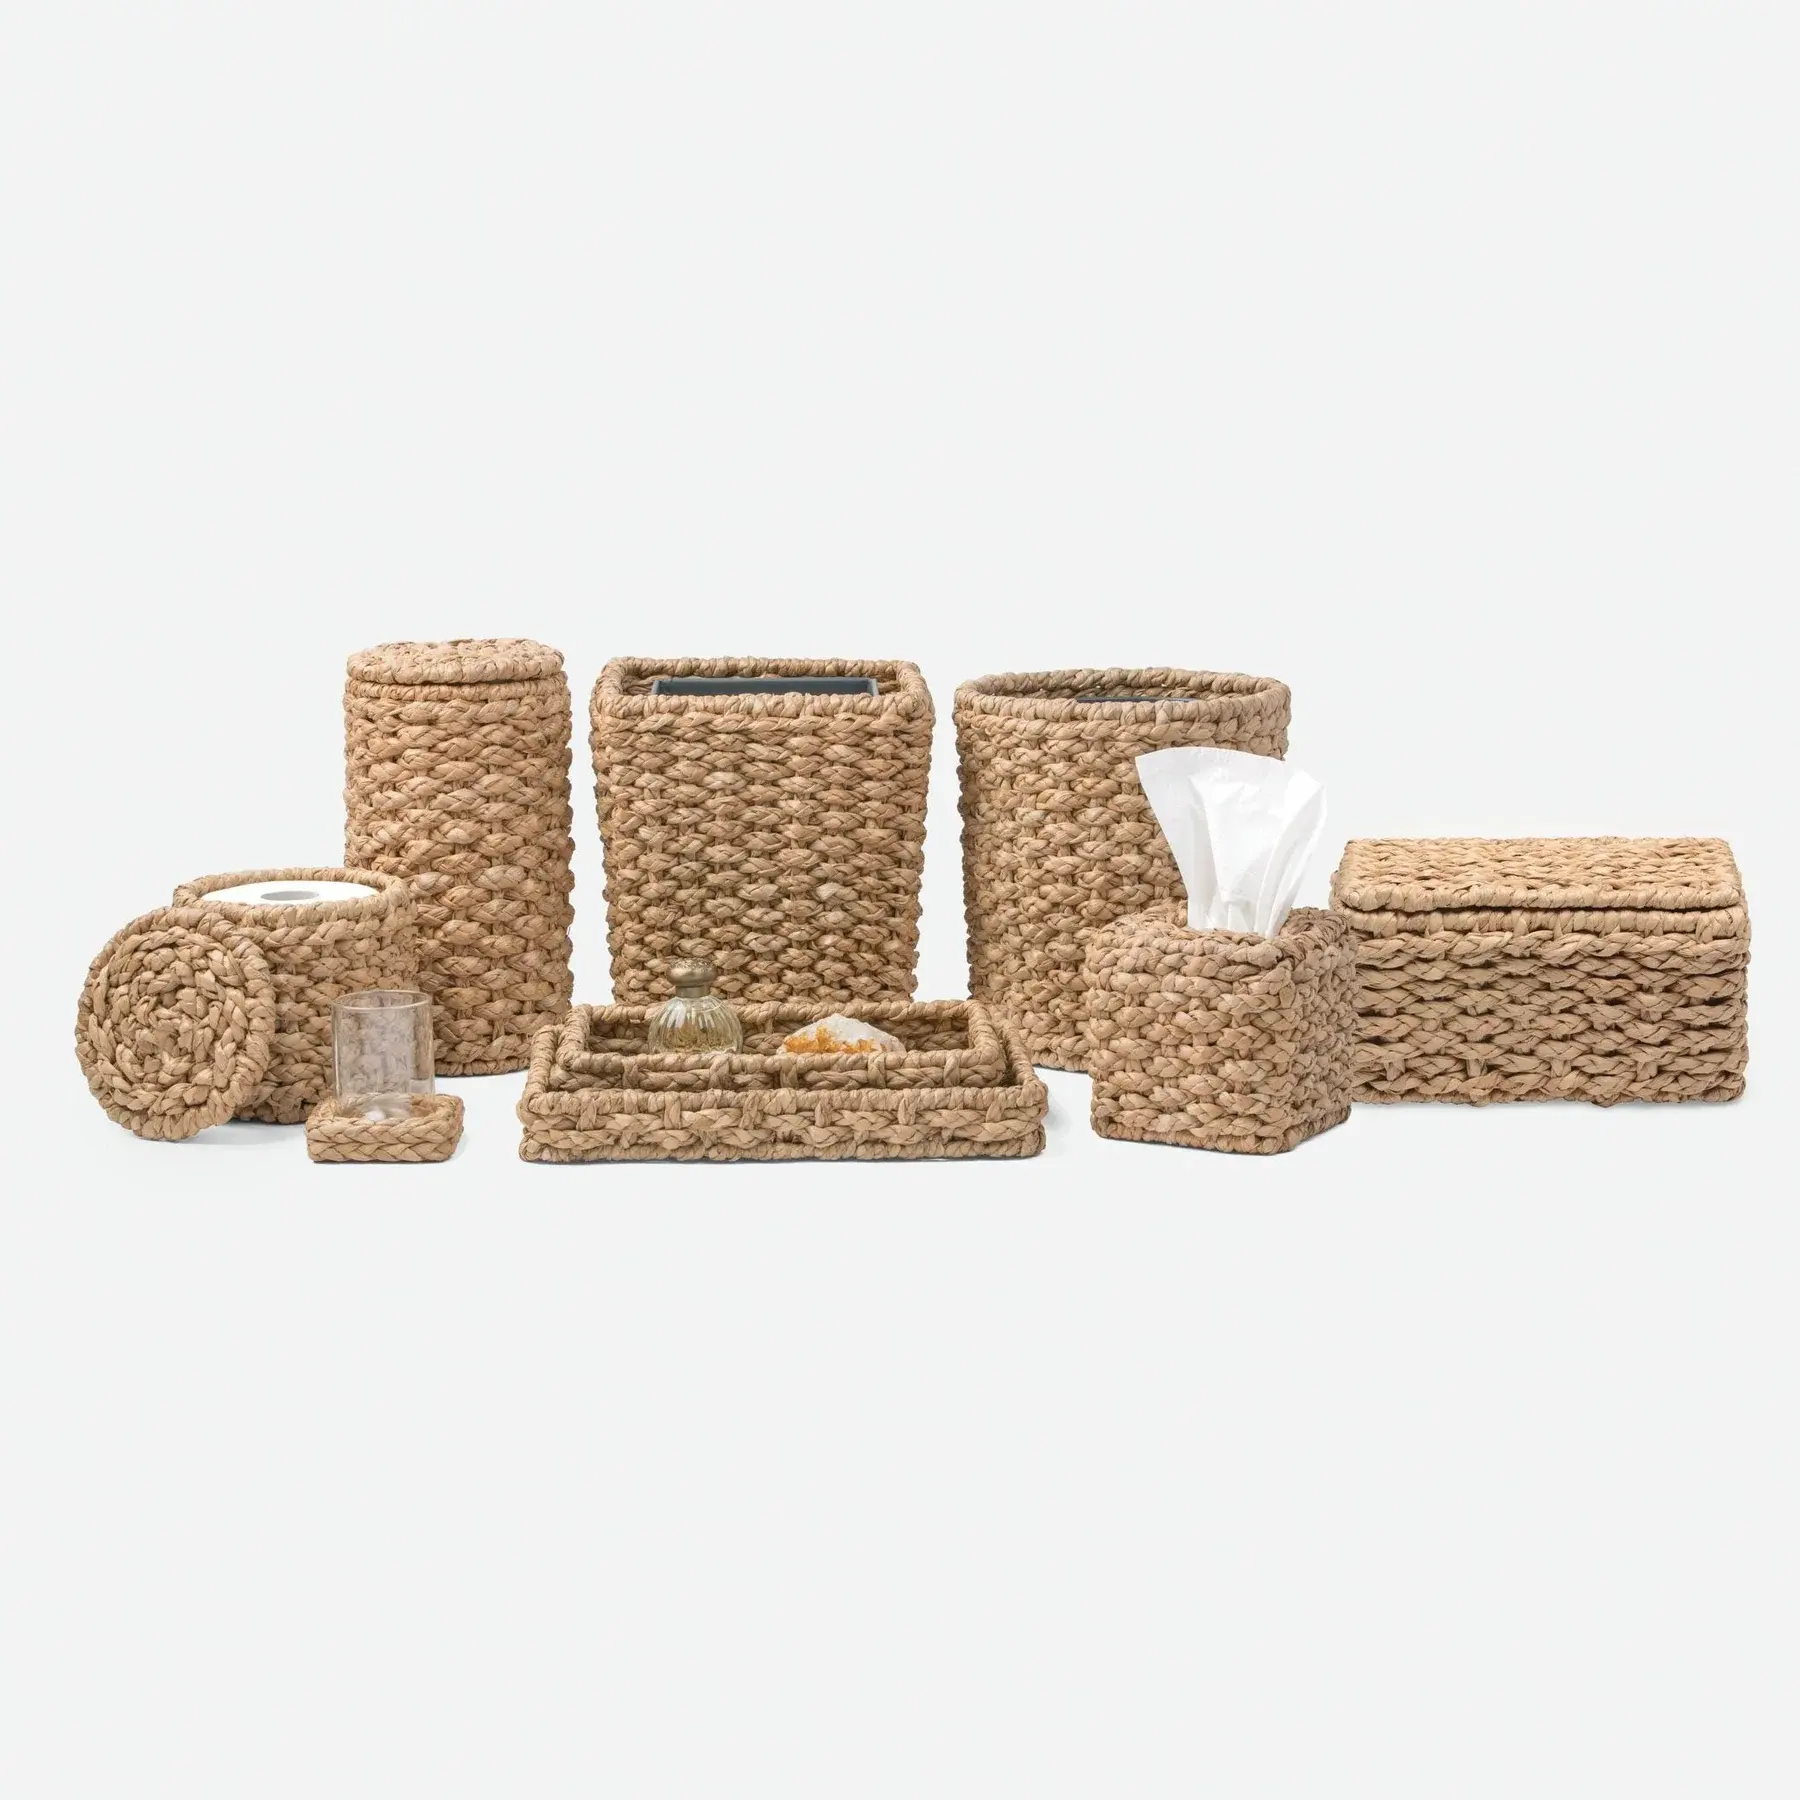 Hand-produced Water Hyacinth Bath Accessories Best Selling Natural Hyacinth Bathroom Sets For Home